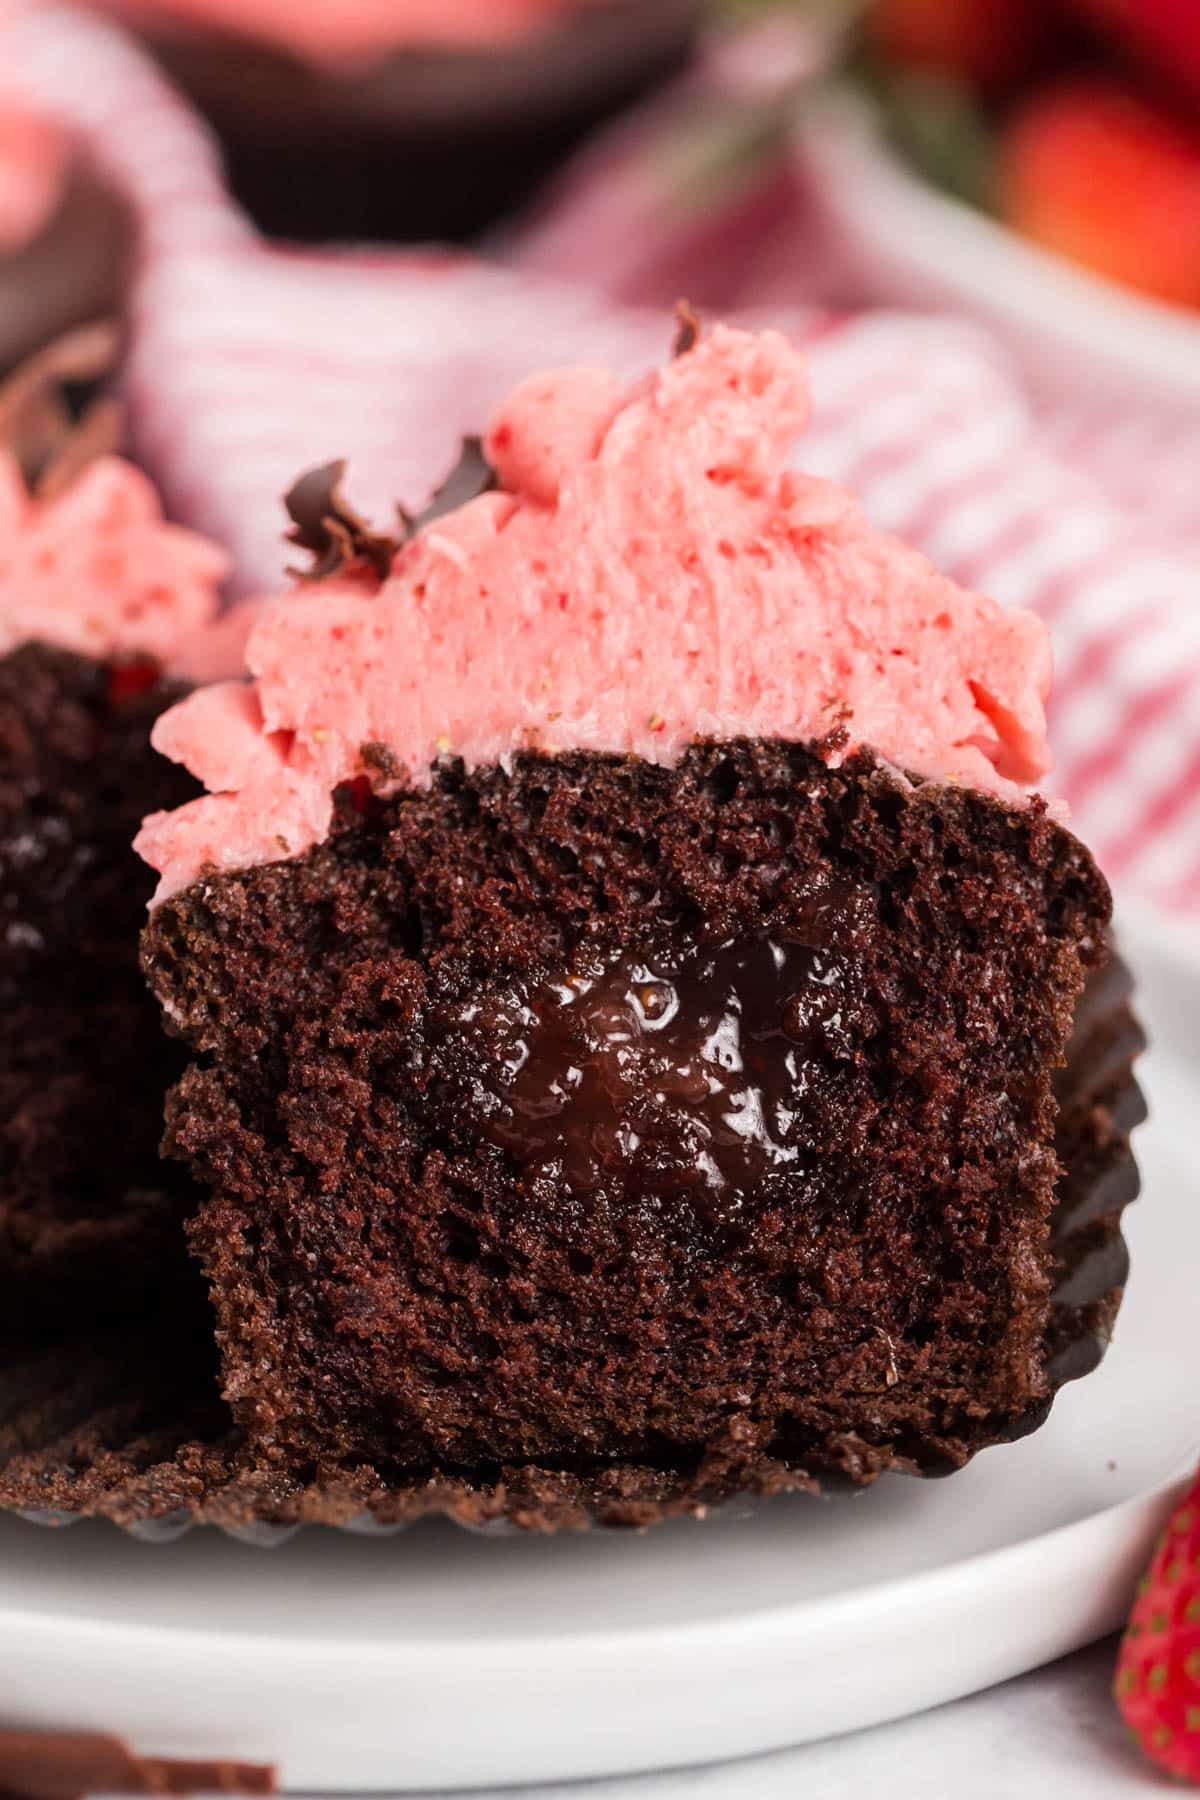 a chocolate strawberry cupcake cut in half to show jam filling